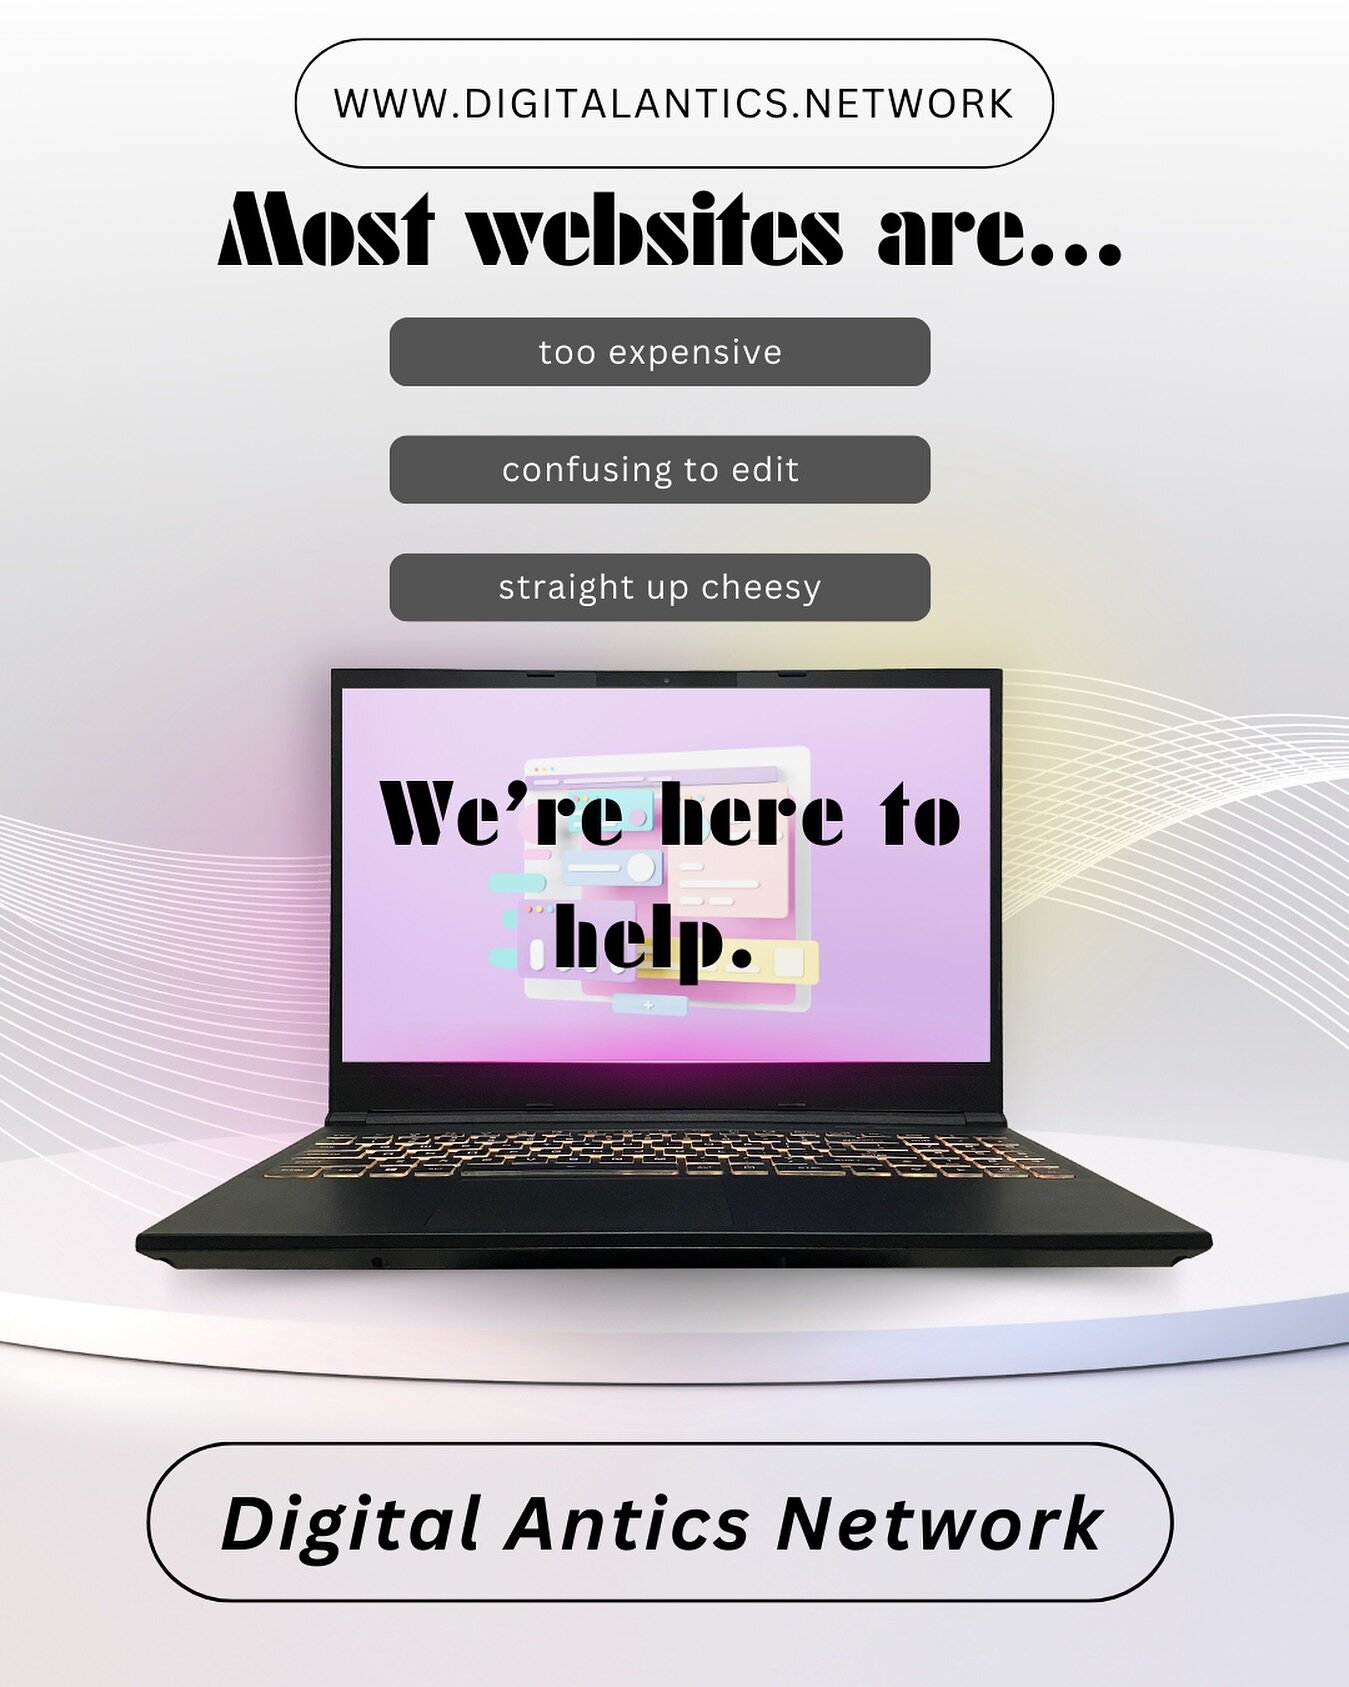 We&rsquo;re here to help! Let us build your next website for your small business or nonprofit.